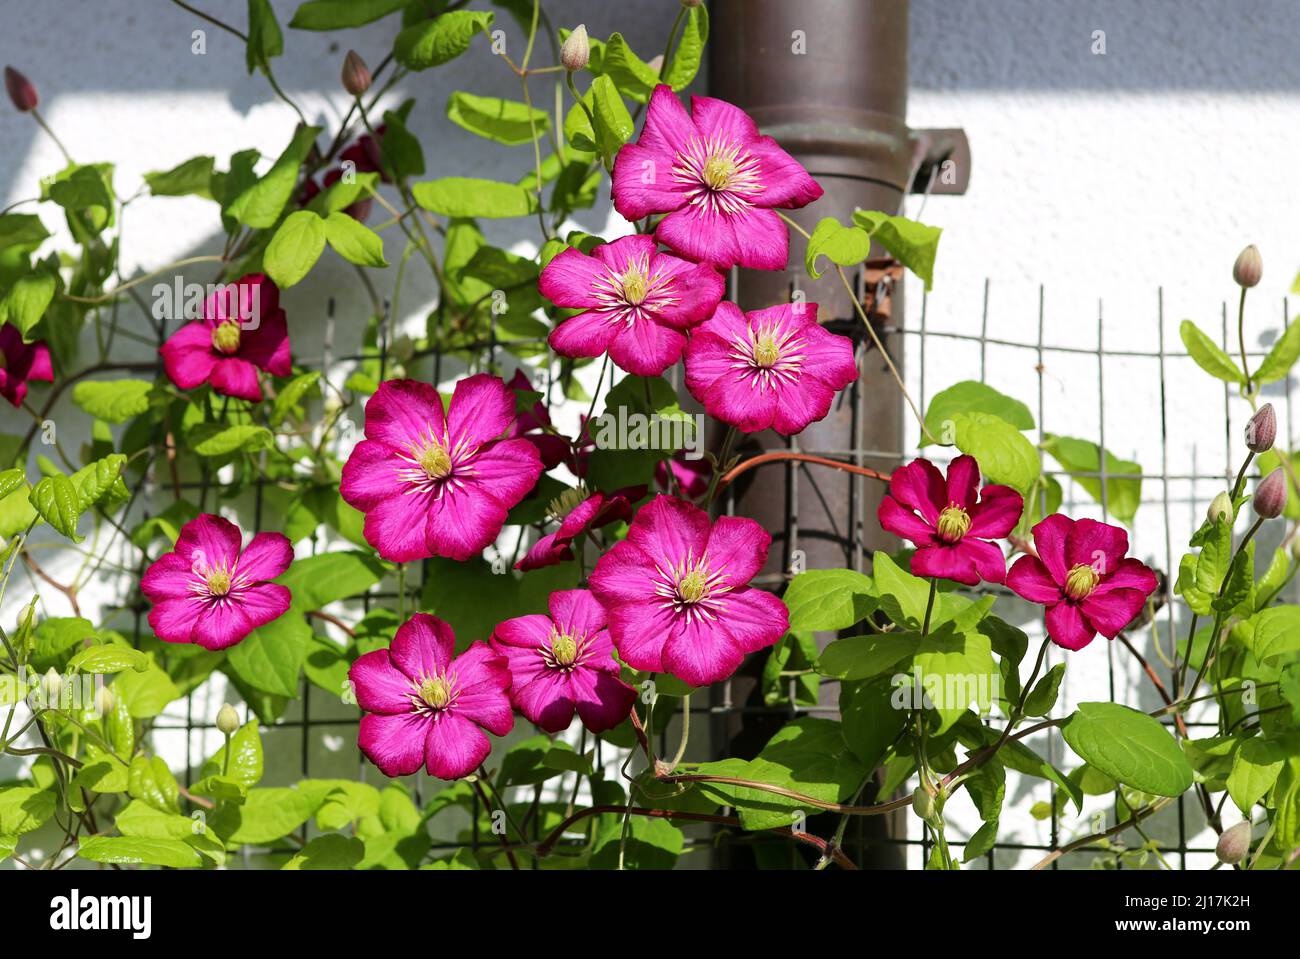 Magenta clematis flowers as camouflage Stock Photo